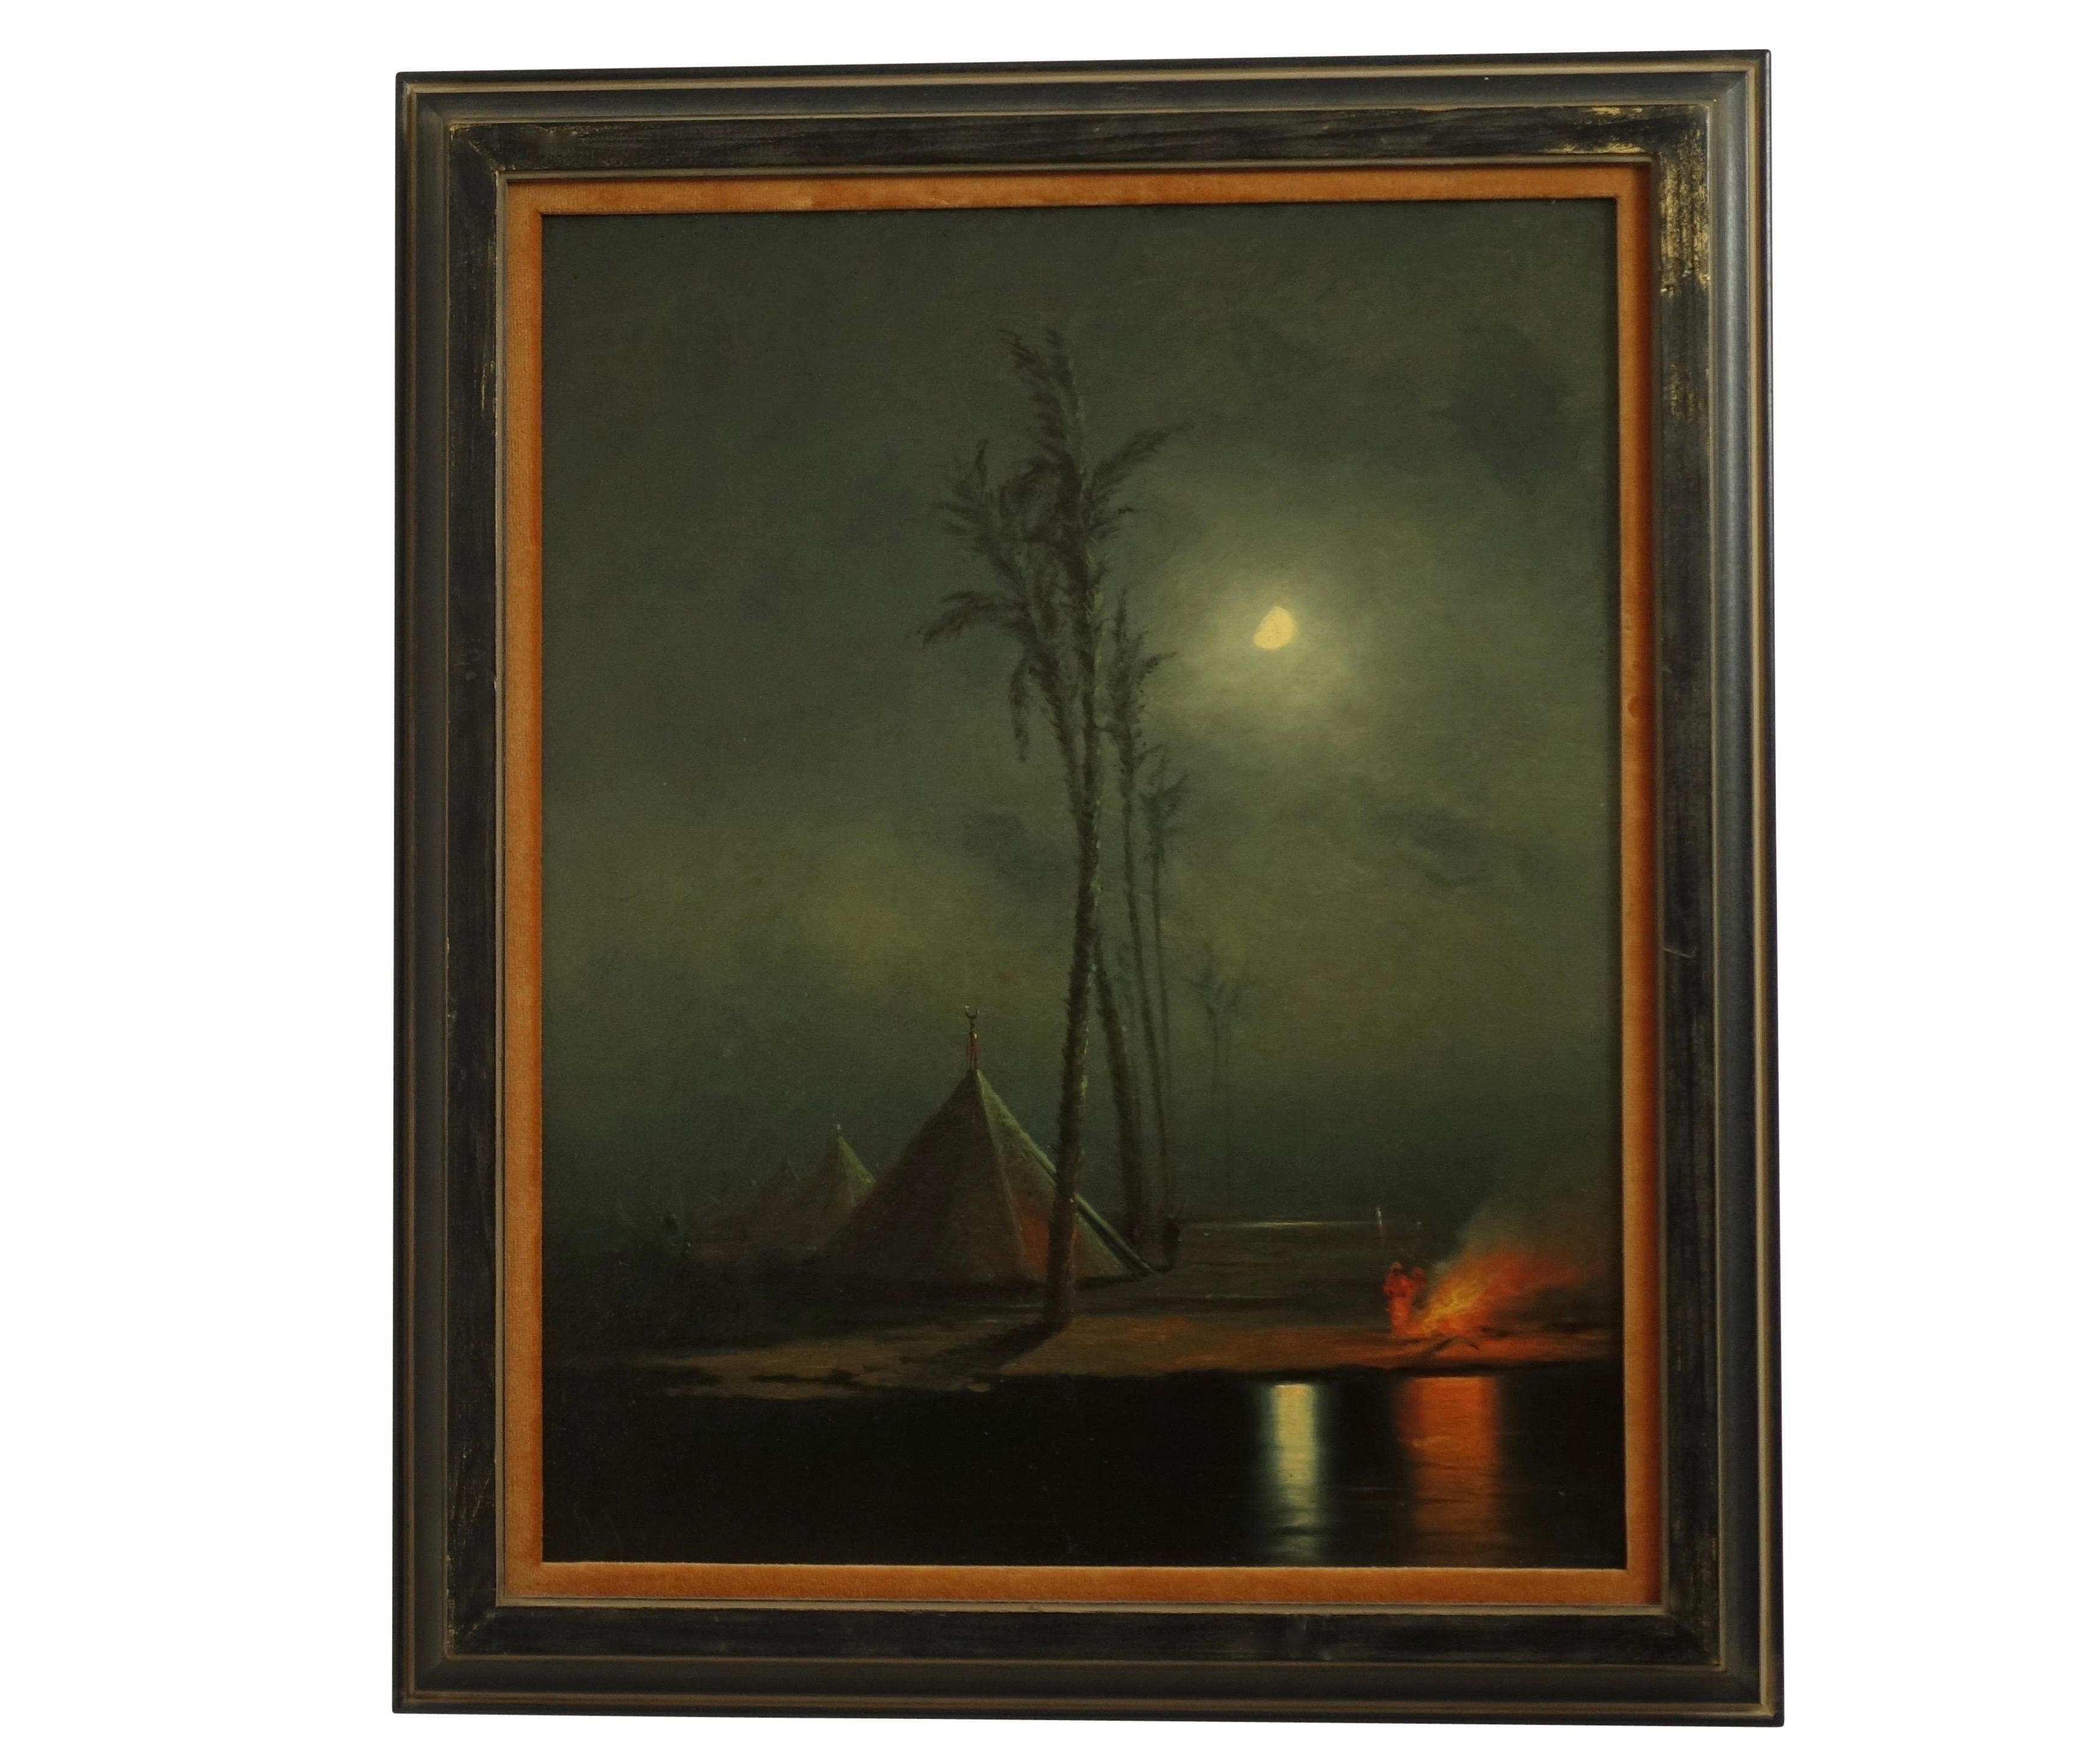 Oil on canvas of a nocturnal desert camp scene of men around a campfire. Signed and dated, g.j. Denny, 1874 (Gideon Jacques Denny) b.1830-d.1886. Sight measurement without frame 20 inches high x 16 inches wide.

Gideon Jacques Denny was